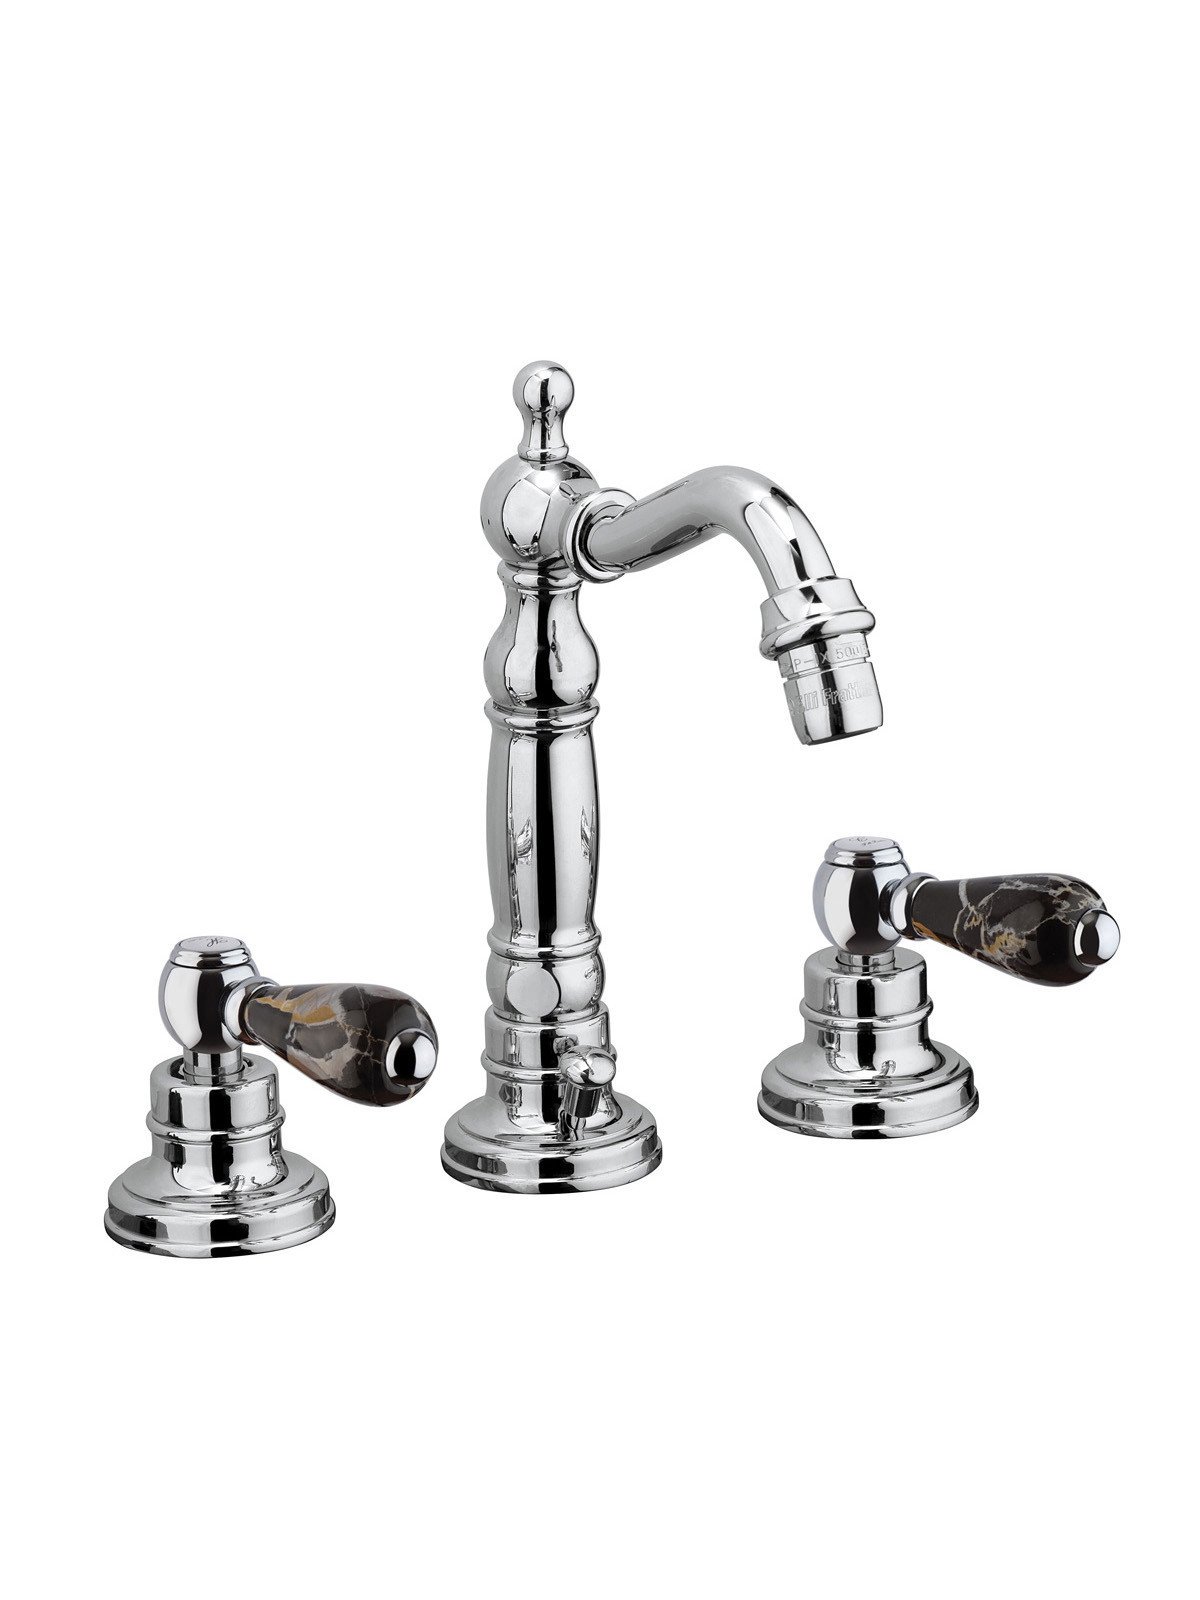 3-hole bidet mixer with old-style spout and 1”1/4 pop-up waste, 